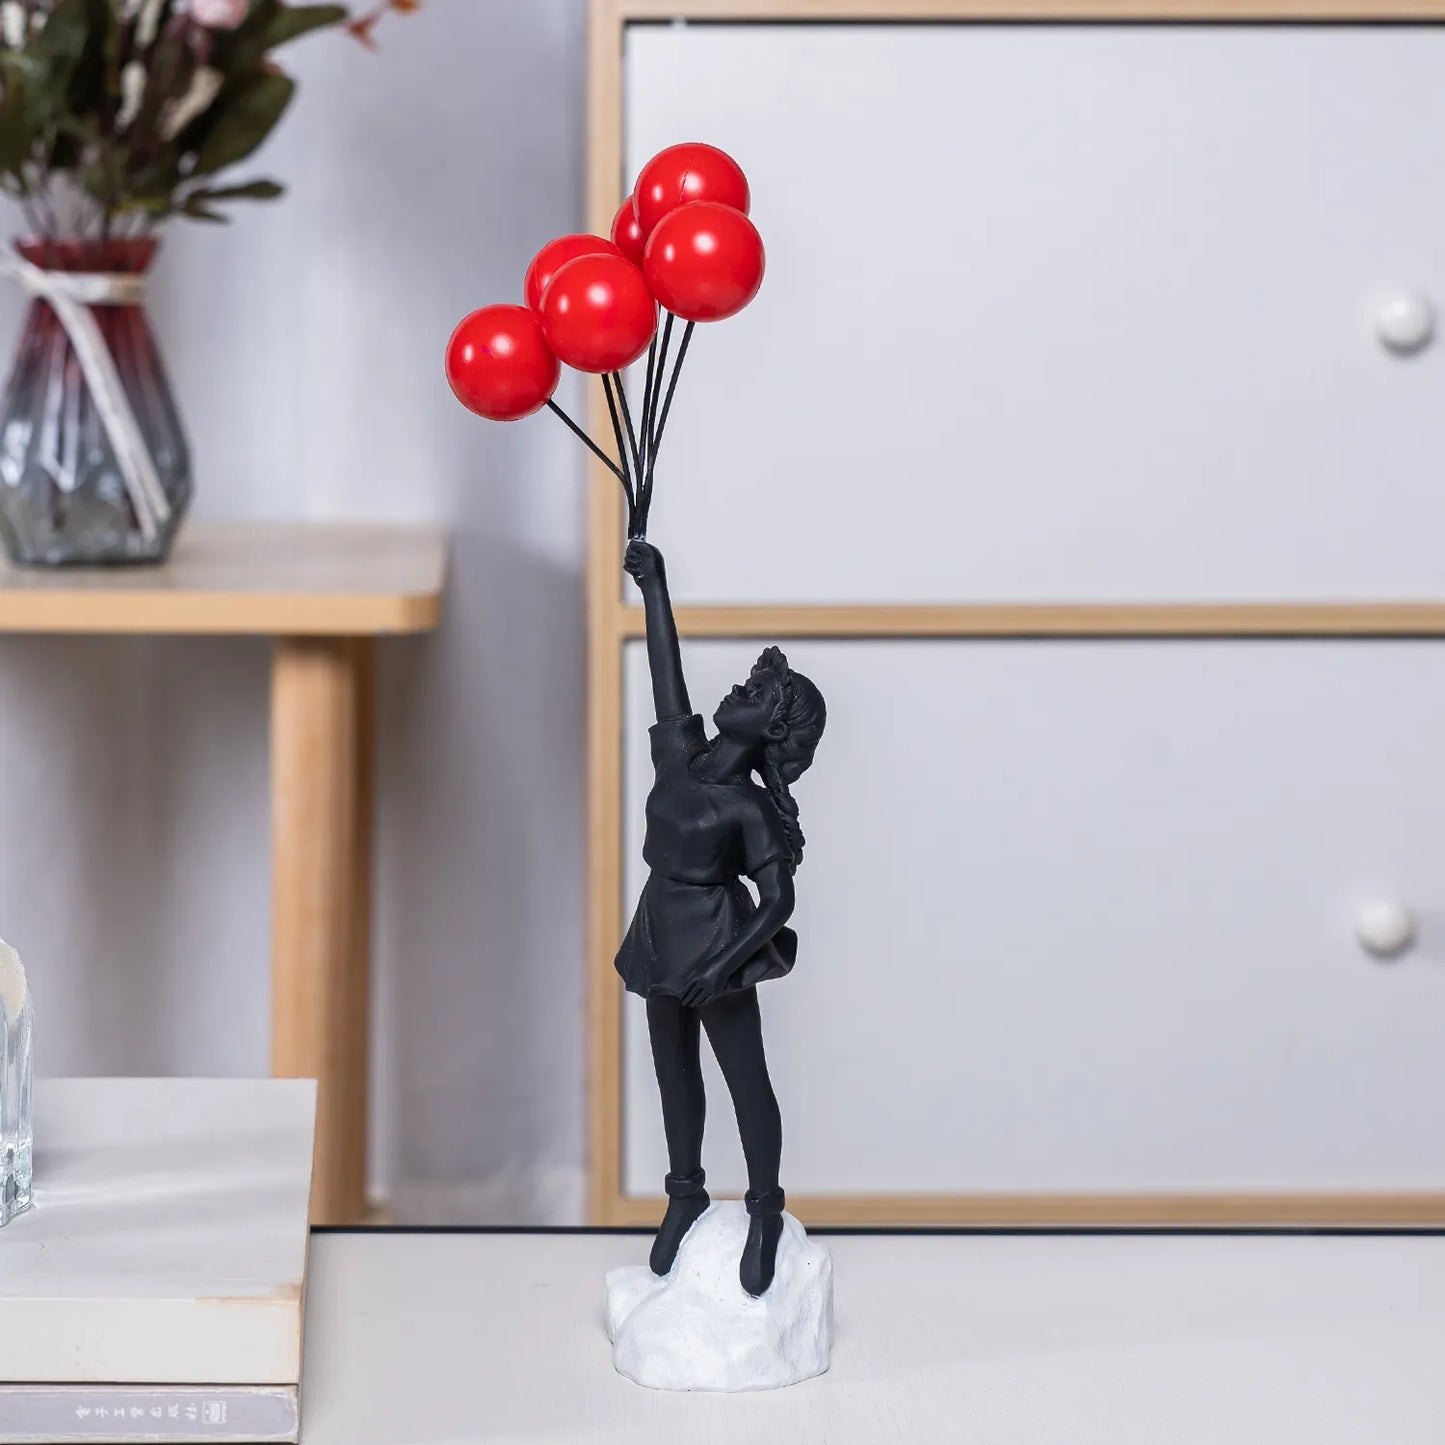 Nordic Modern Banksy Resin Statue Home Decor Flying Balloon Girl Art Sculpture Figurine Craft Ornaments Living Room Decorations